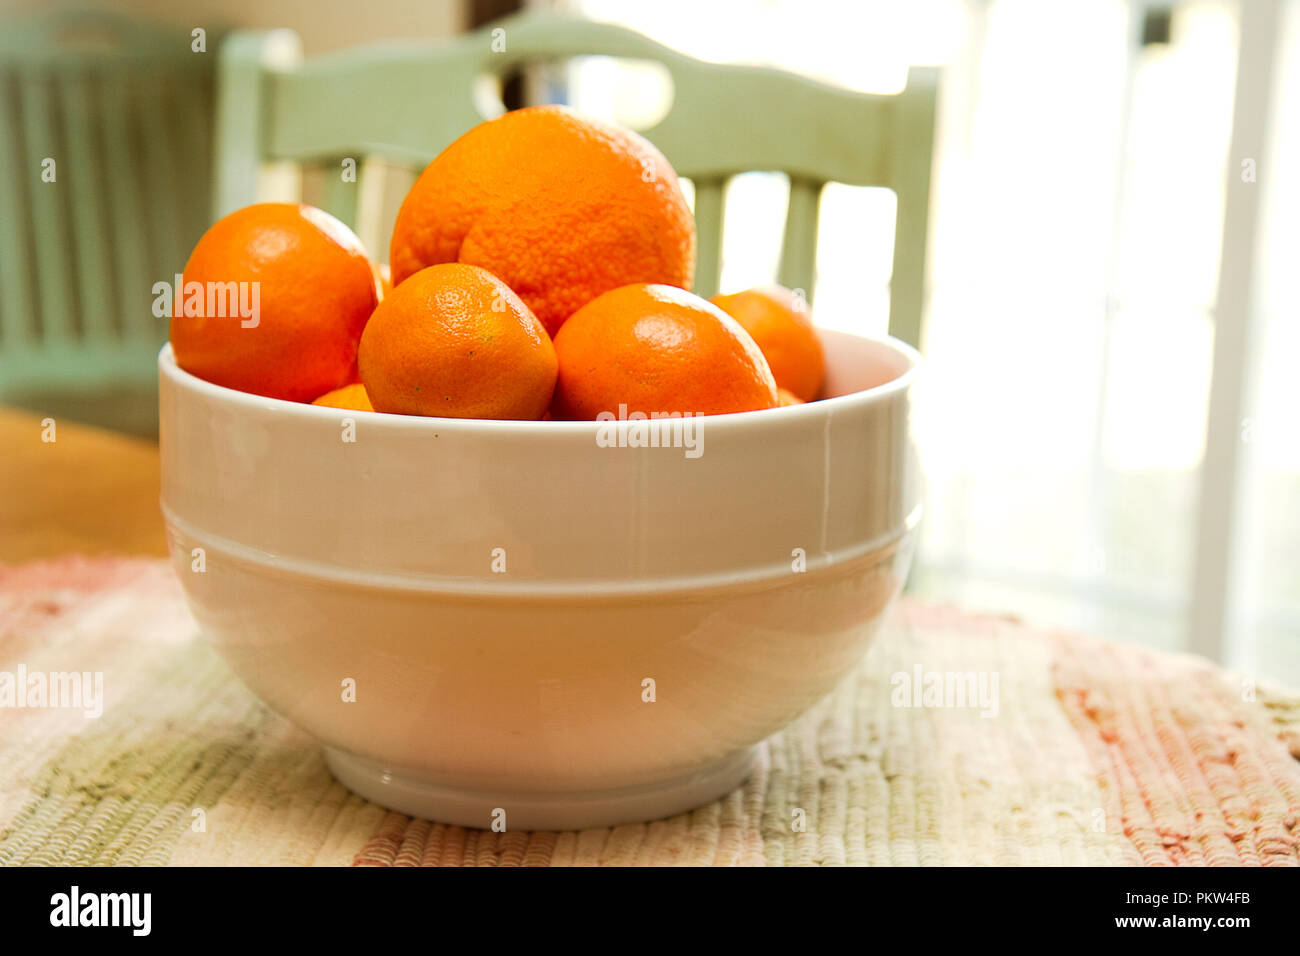 Fresh fruit, oranges concept healthy eating and dieting. Stock Photo